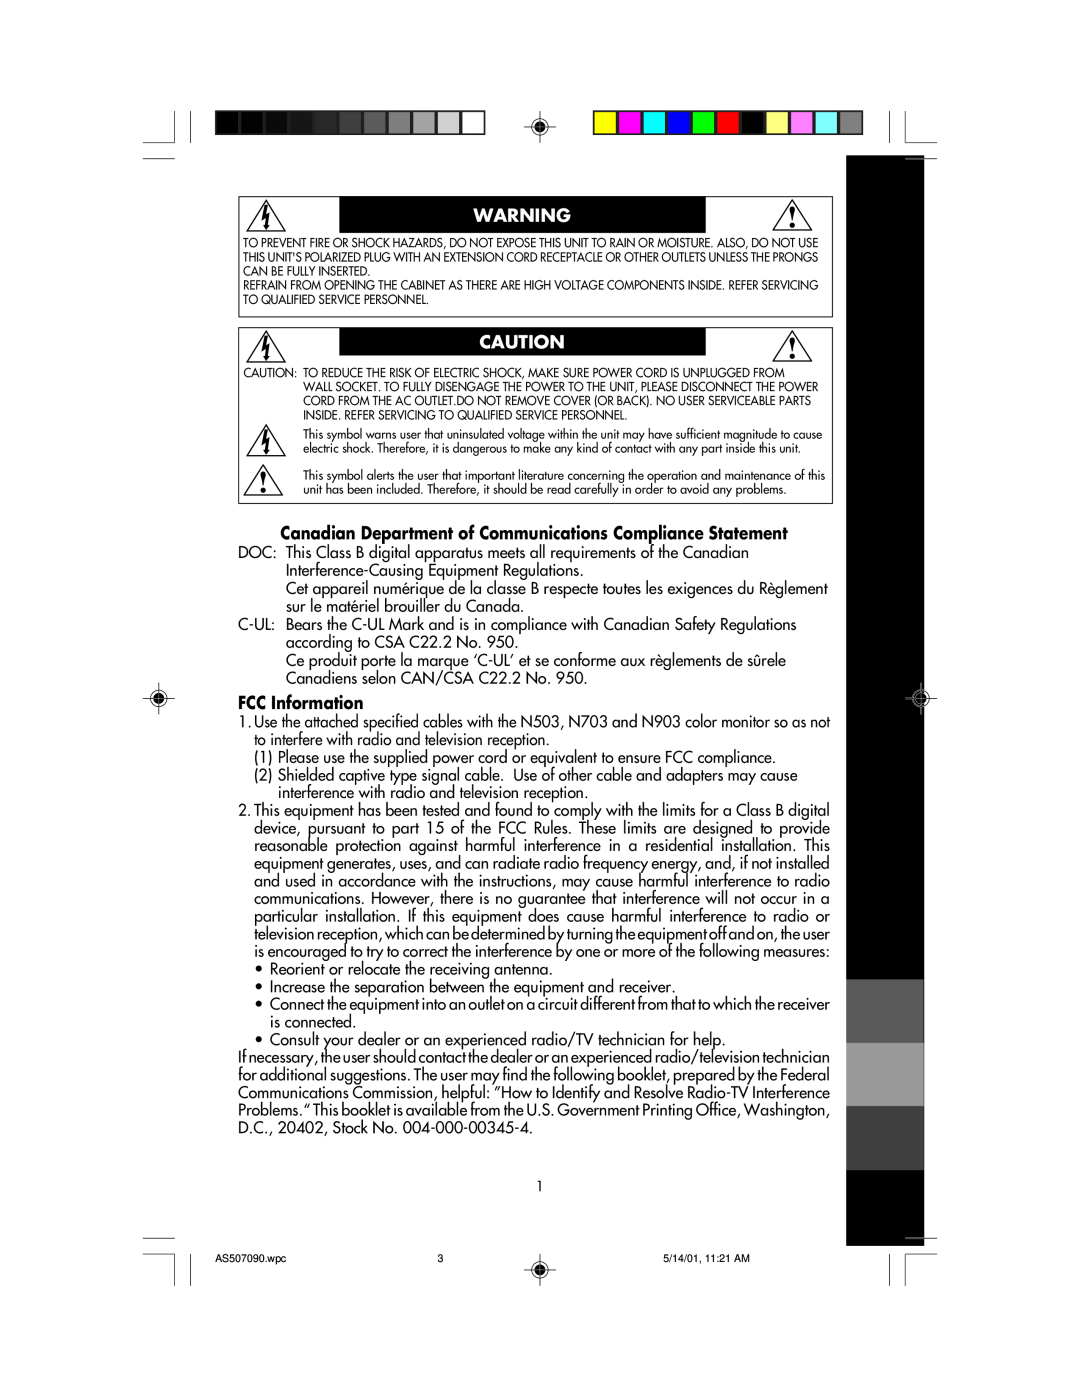 NEC AccuSync 90, AccuSync 70, AccuSync 50 Canadian Department of Communications Compliance Statement, FCC Information 